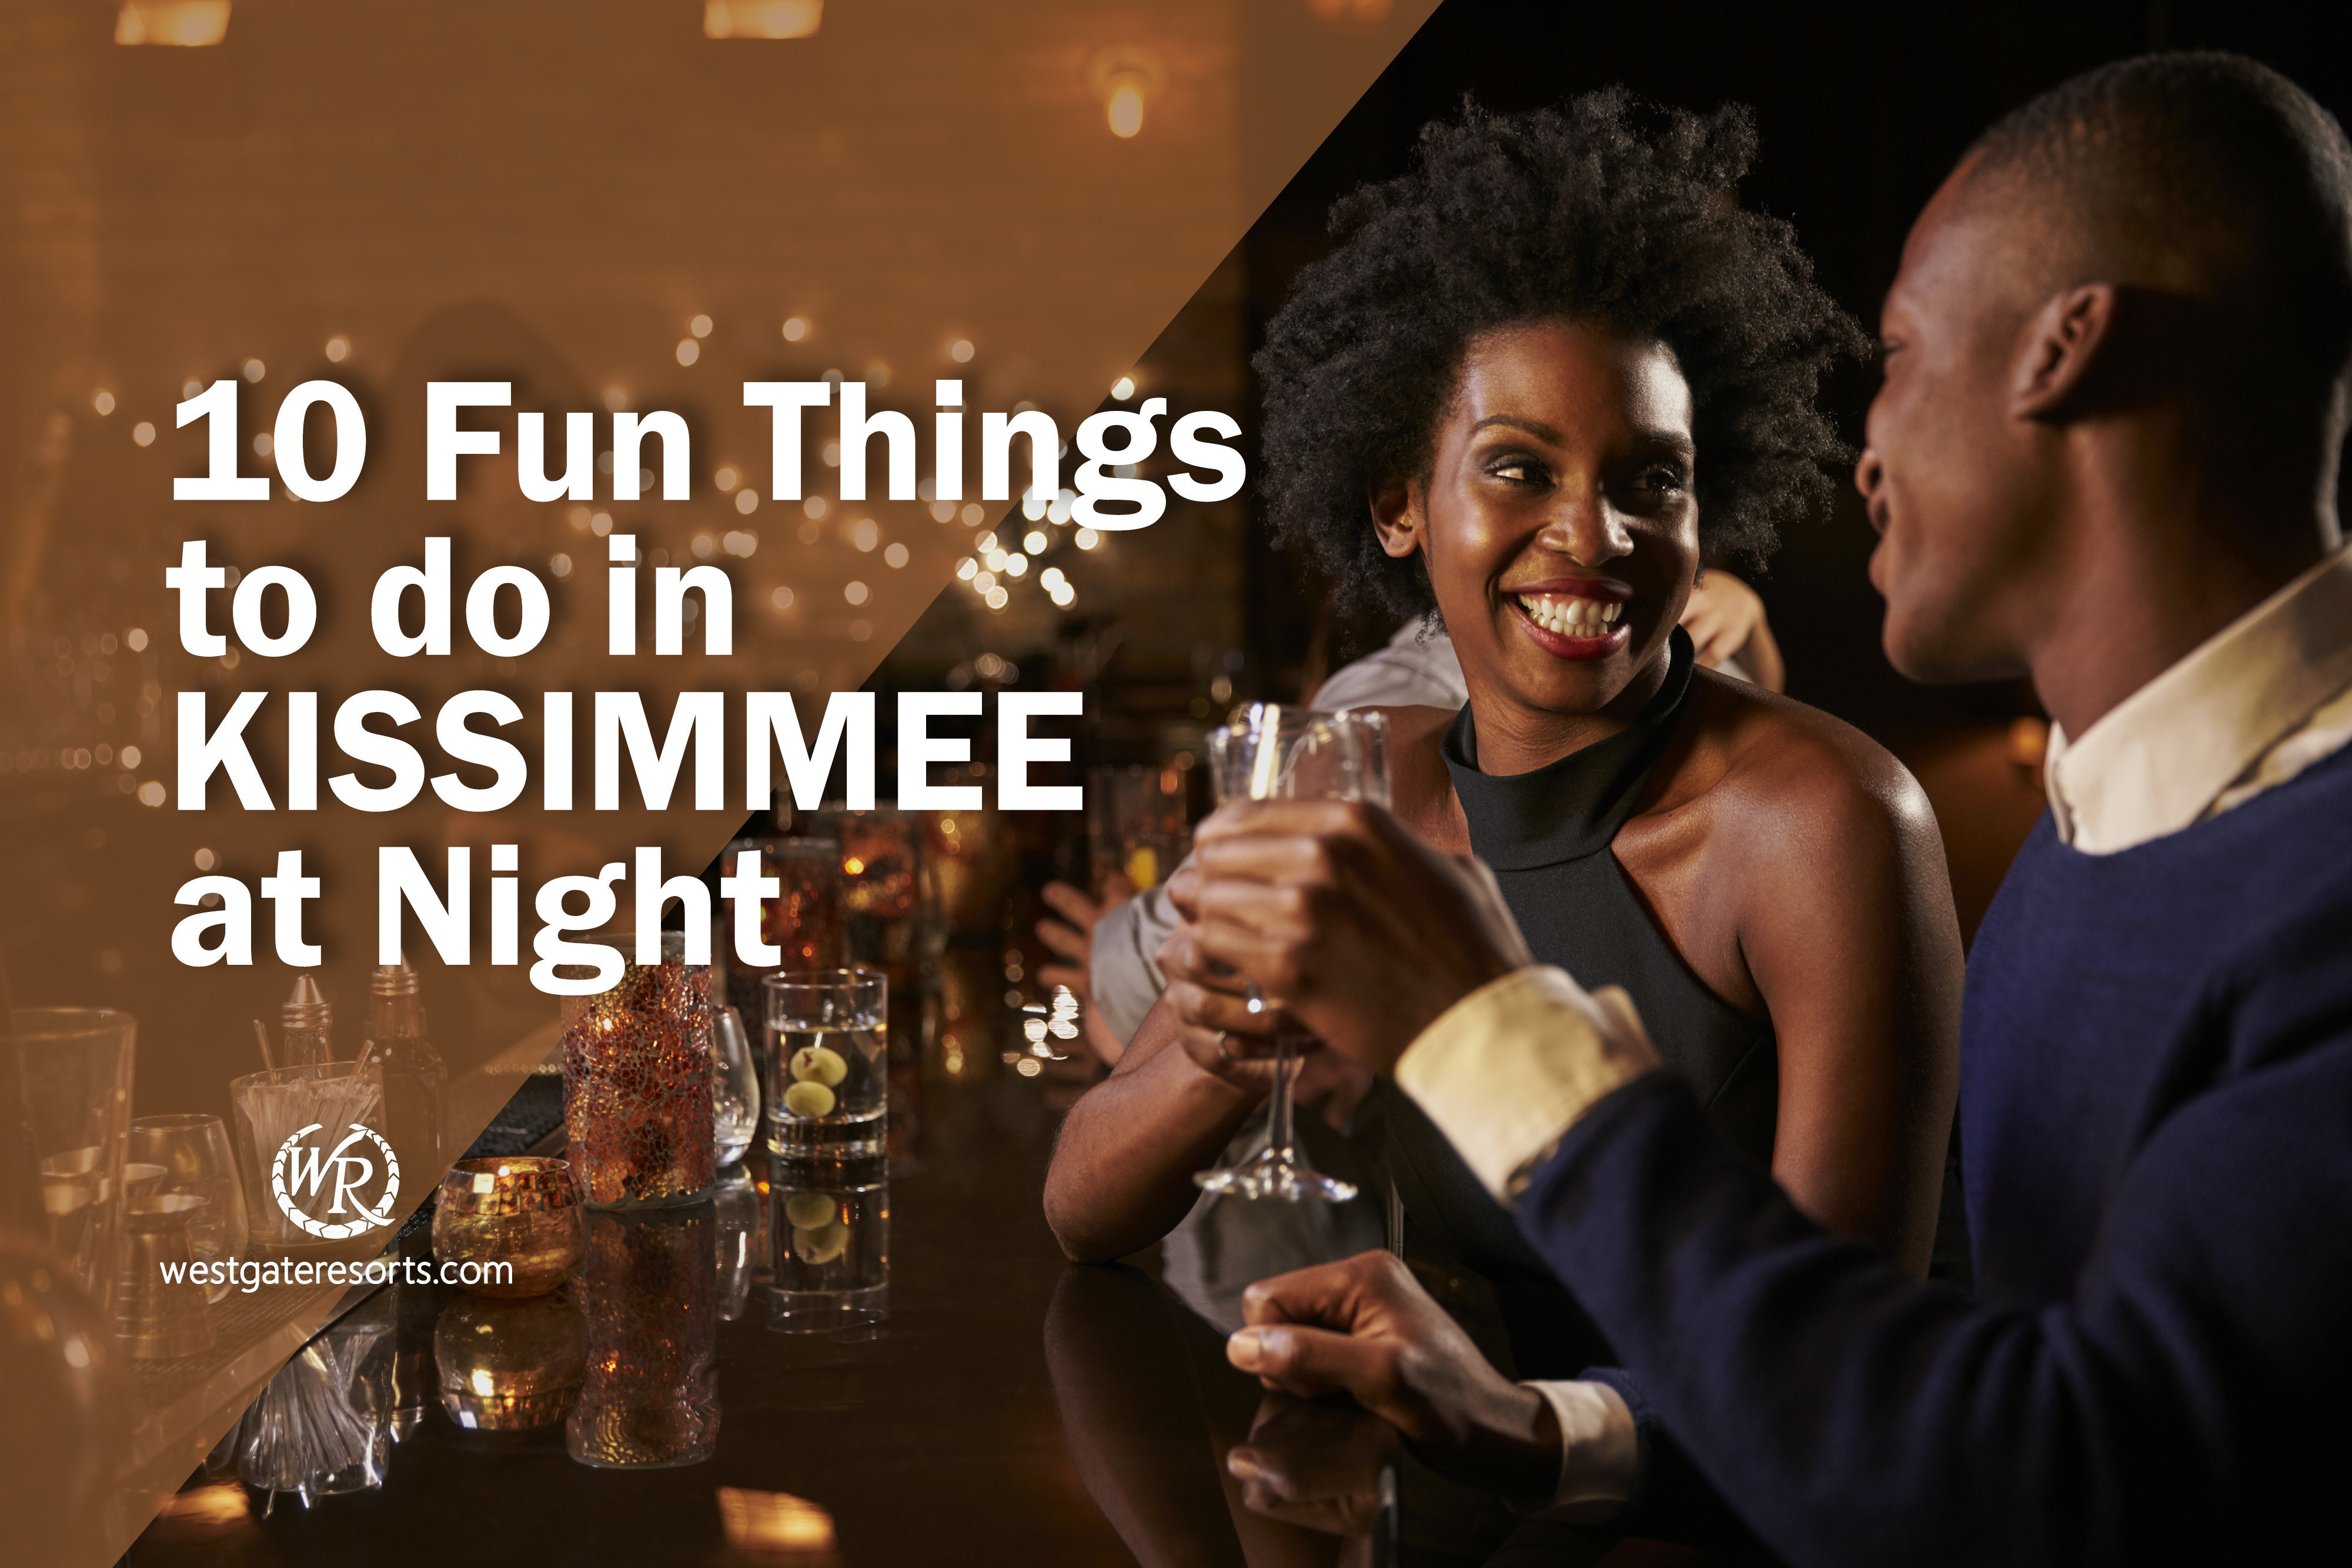 10 Fun Things to do in Kissimmee at Night